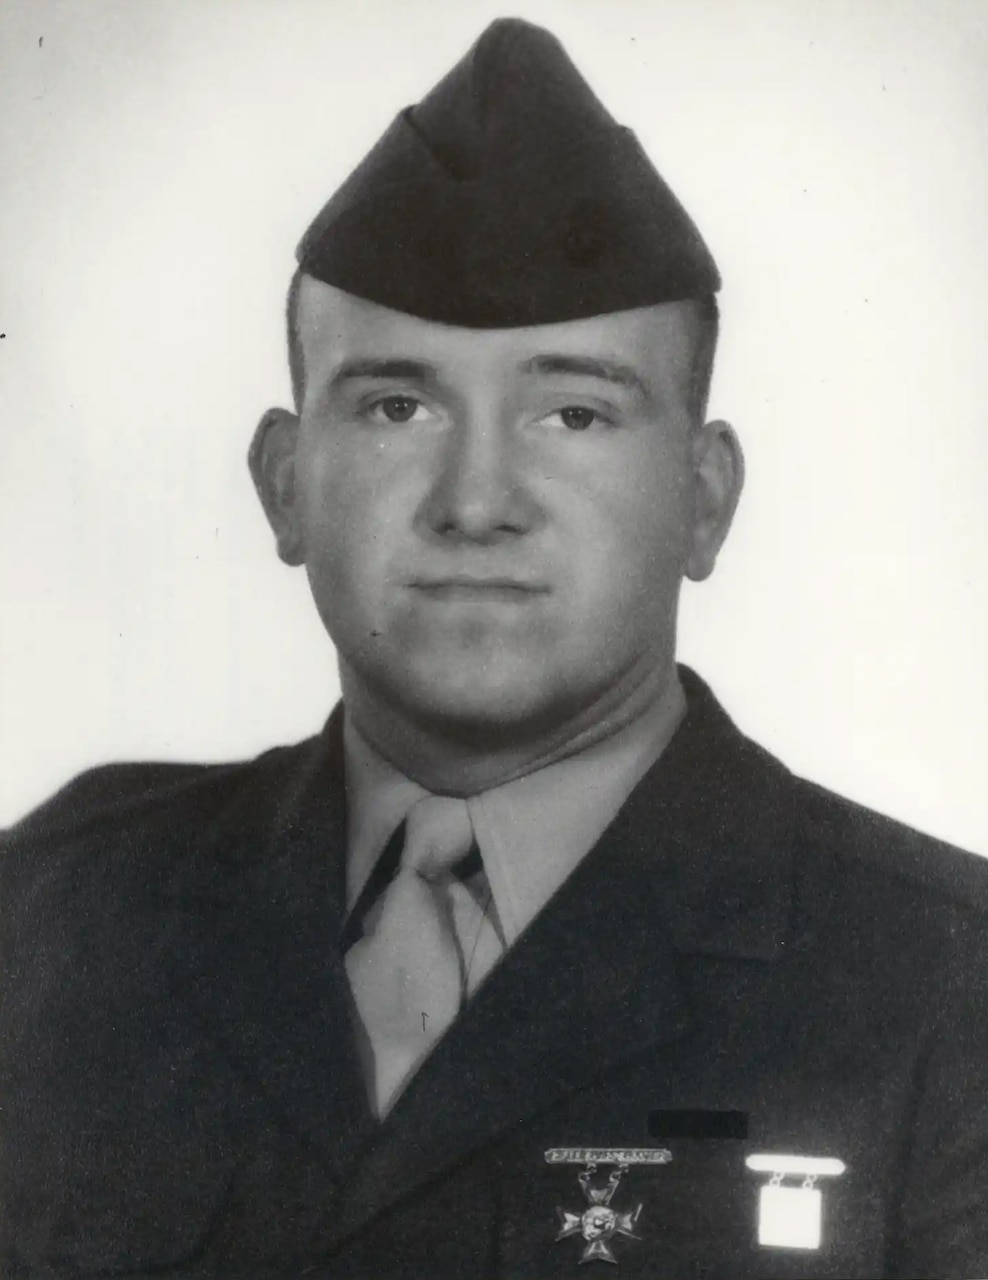 A man in uniform poses for a photo.